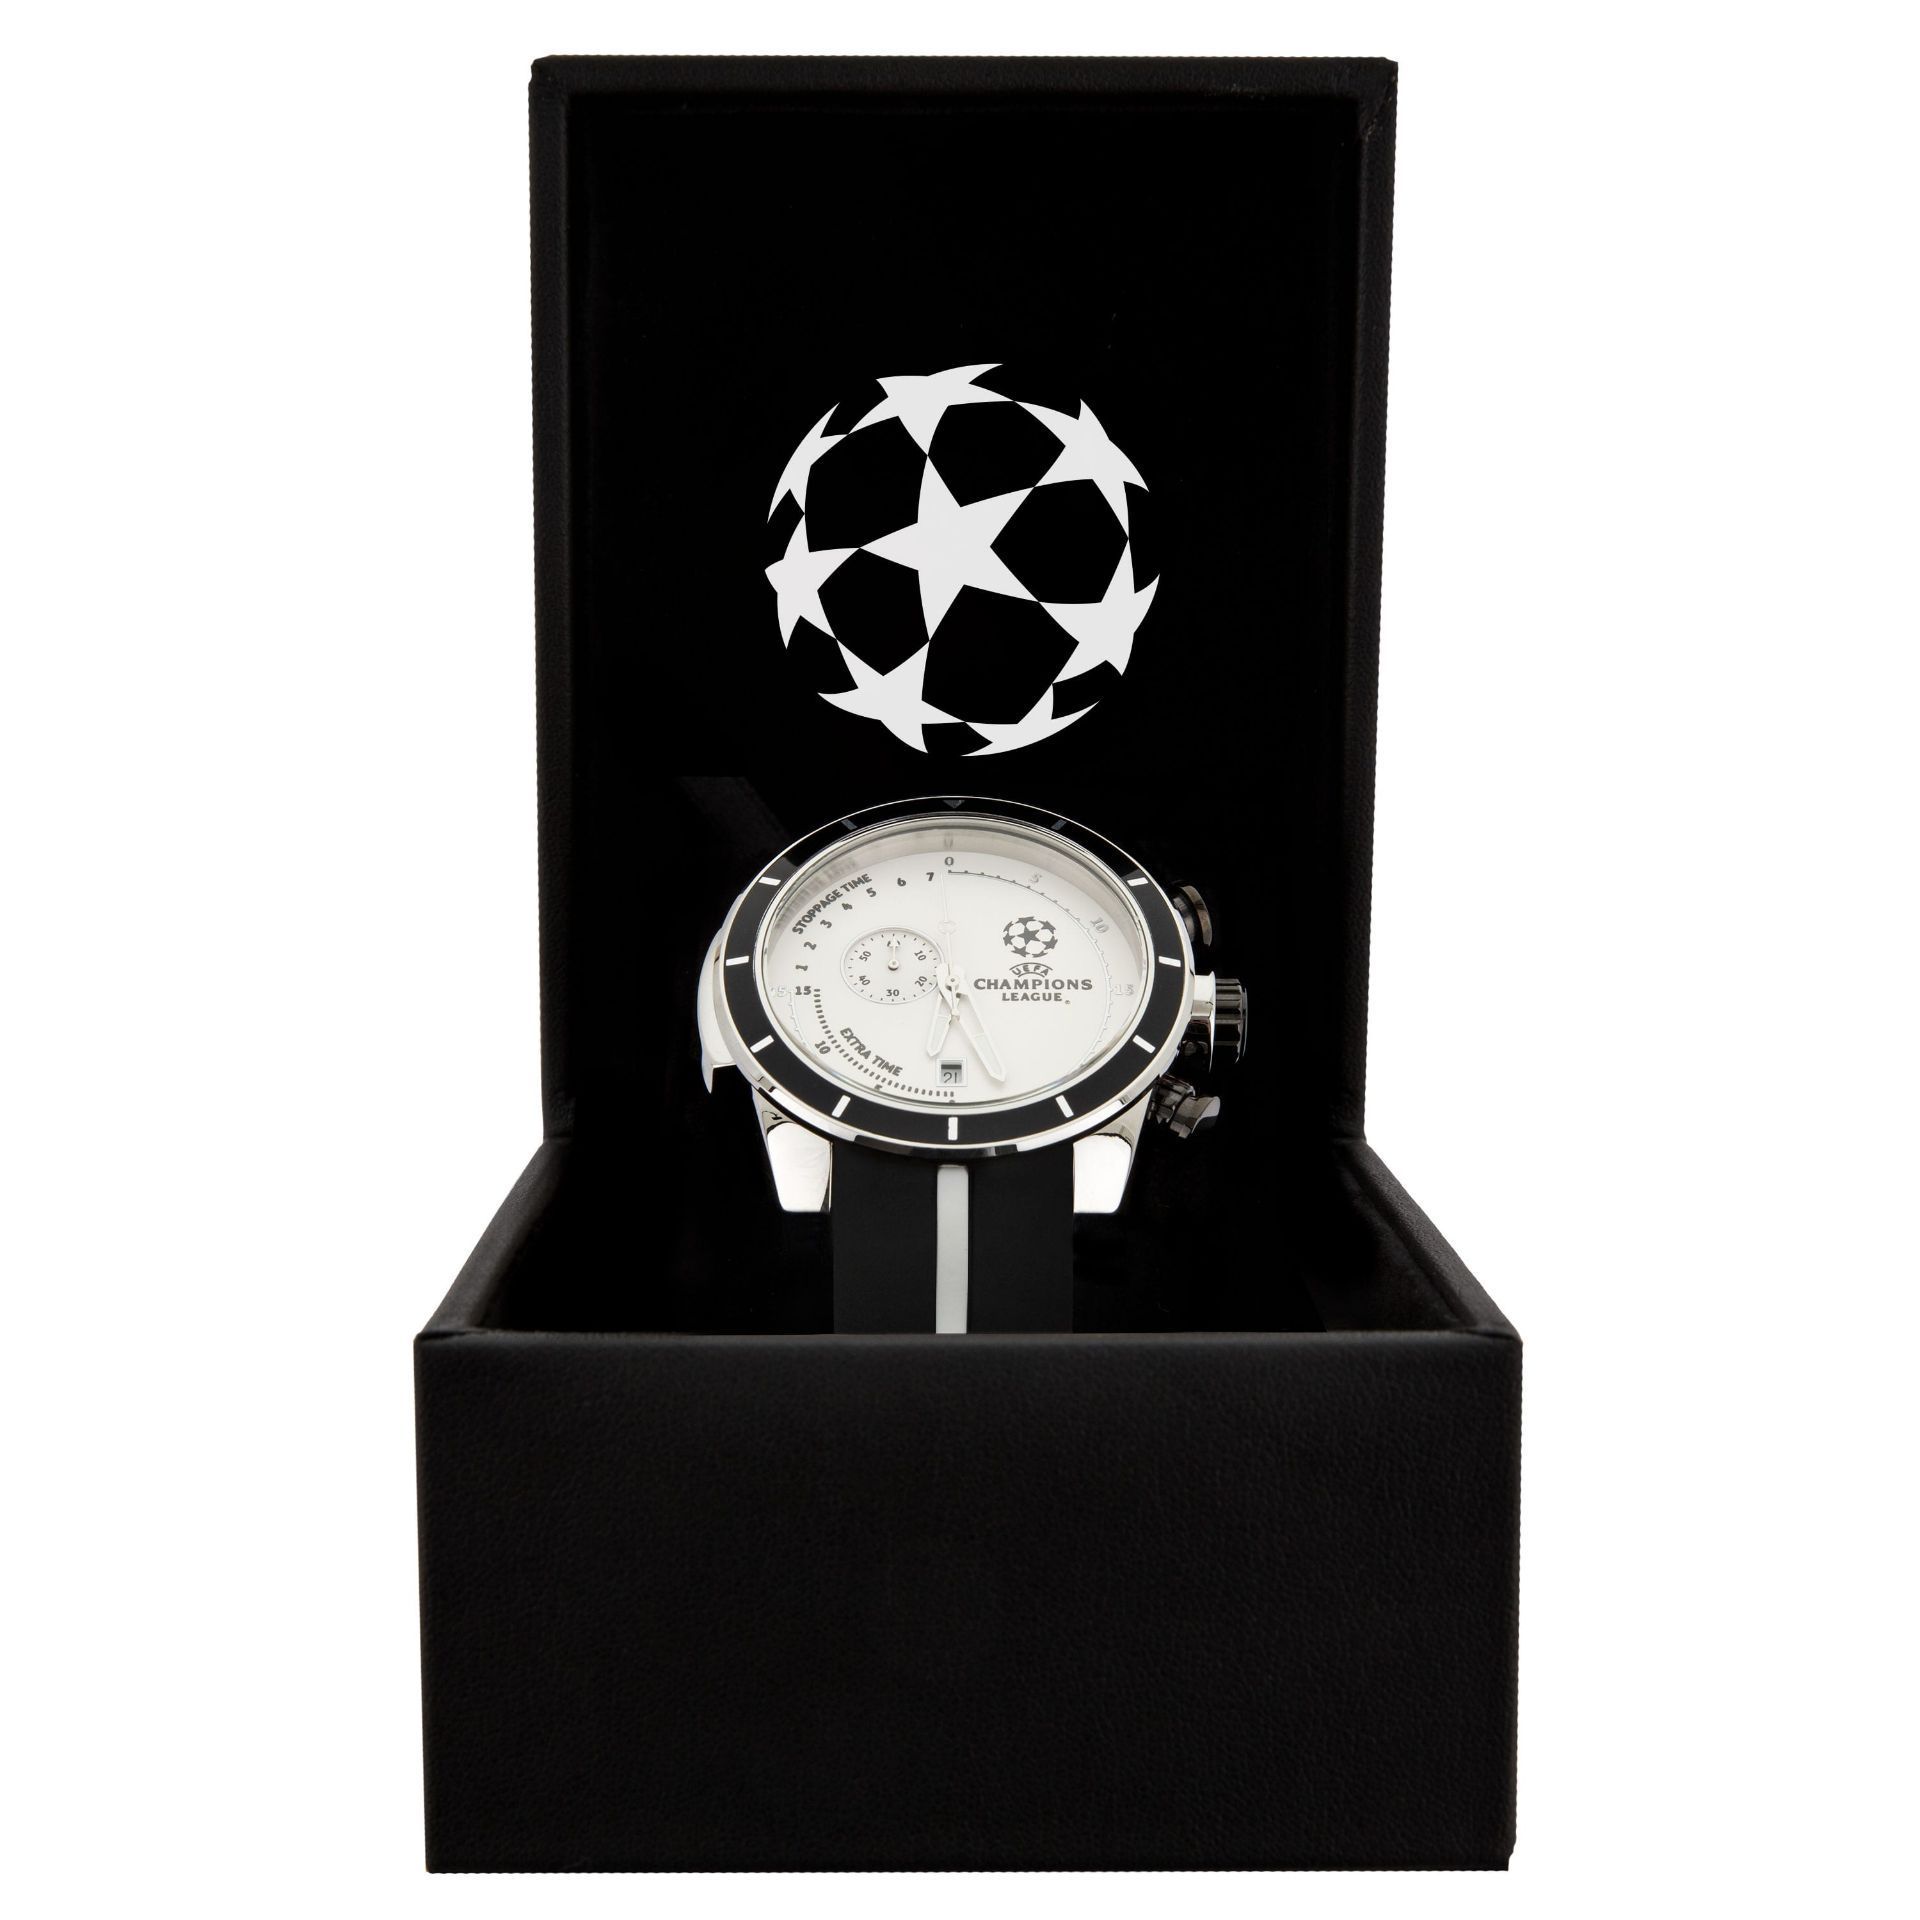 BULK LOT OF 19 x BRAND NEW OFFICIAL UEFA CHAMPIONS LEAGUE 45 MINUTE COUNTDOWN WATCH CL45-STB-GRBLP - Image 4 of 5